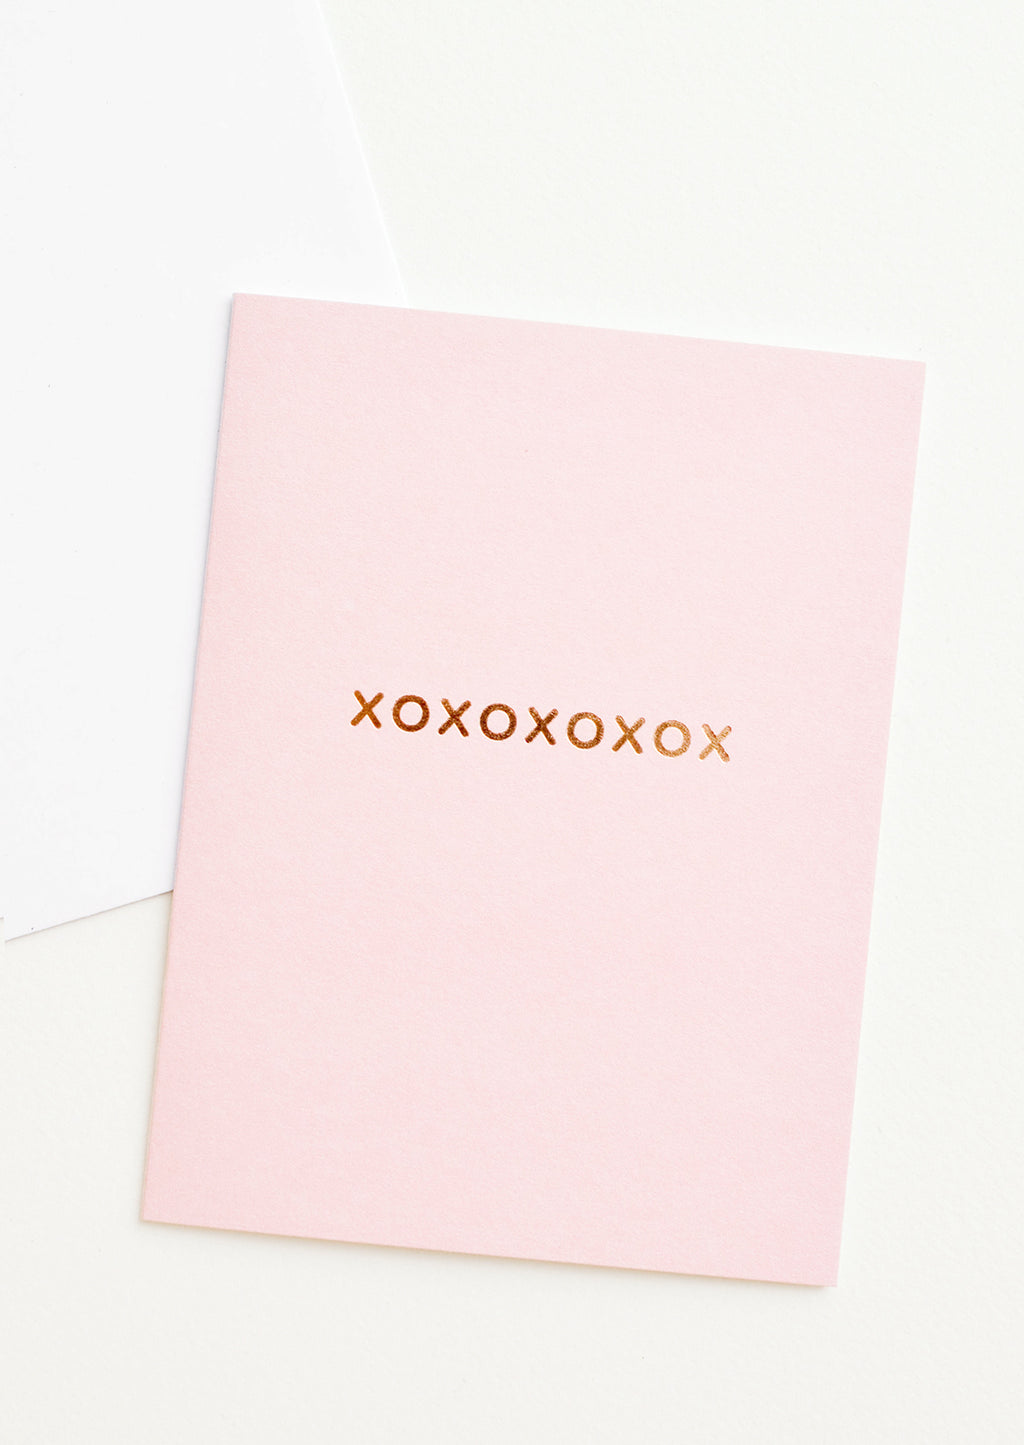 1: A pale pink greeting card with "xoxoxoxoxox" in gold foil.